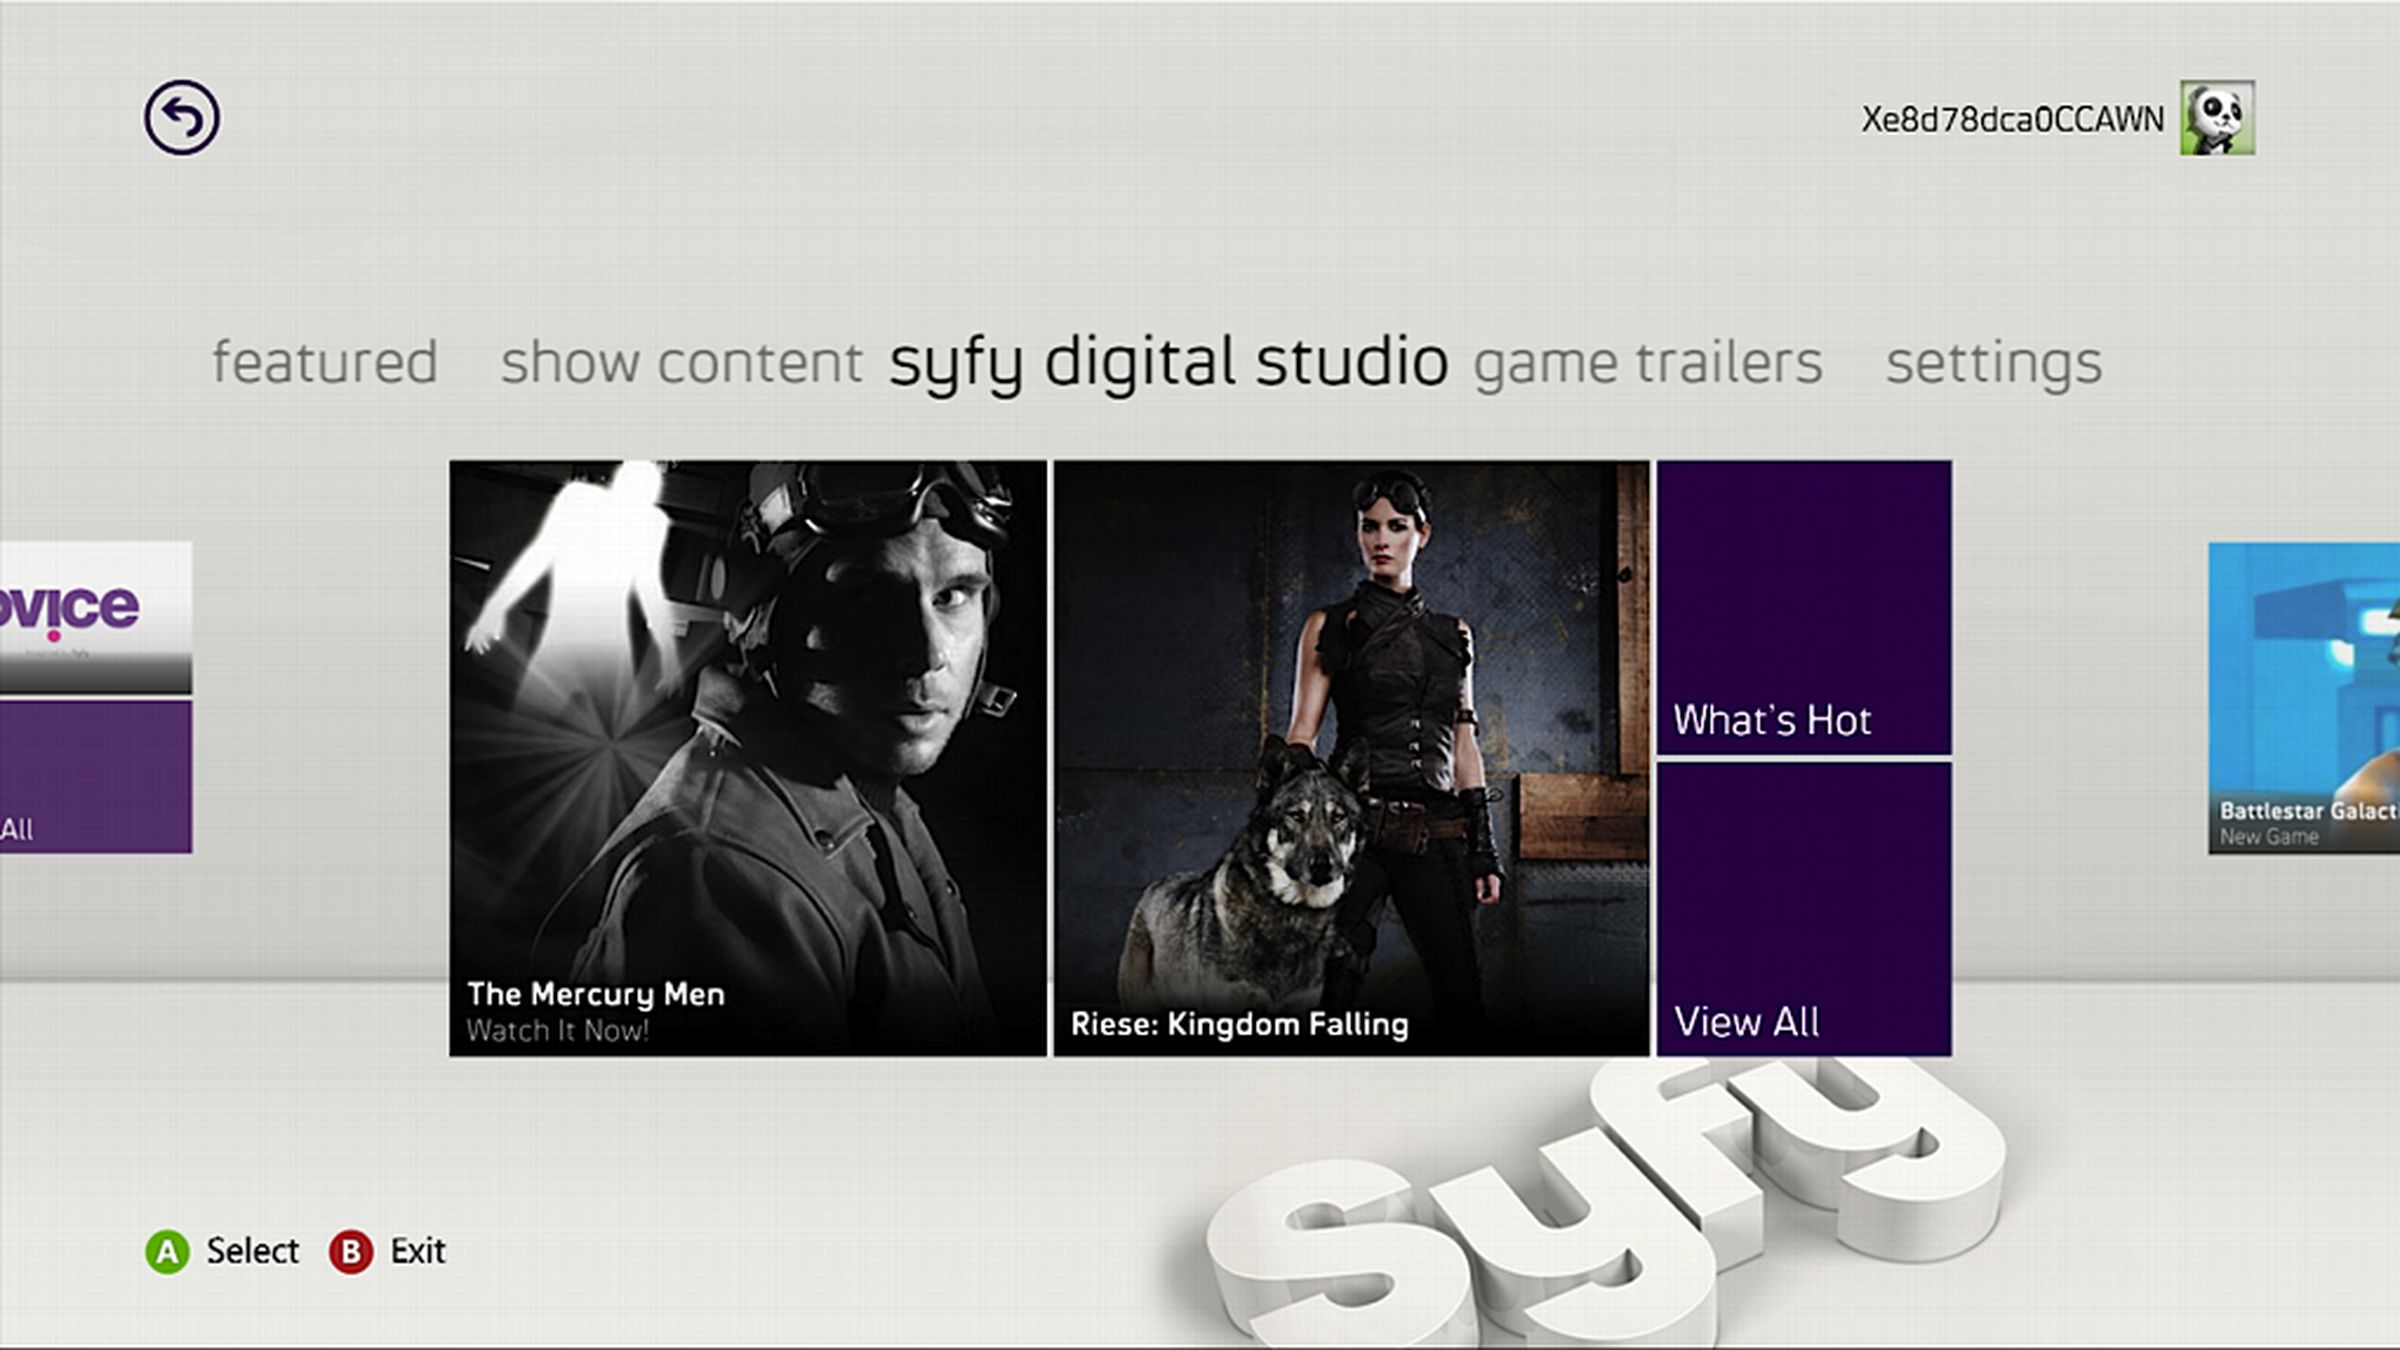 Xbox Live 2011-2012 content partners: YouTube, SyFy, a new Netflix, and more!